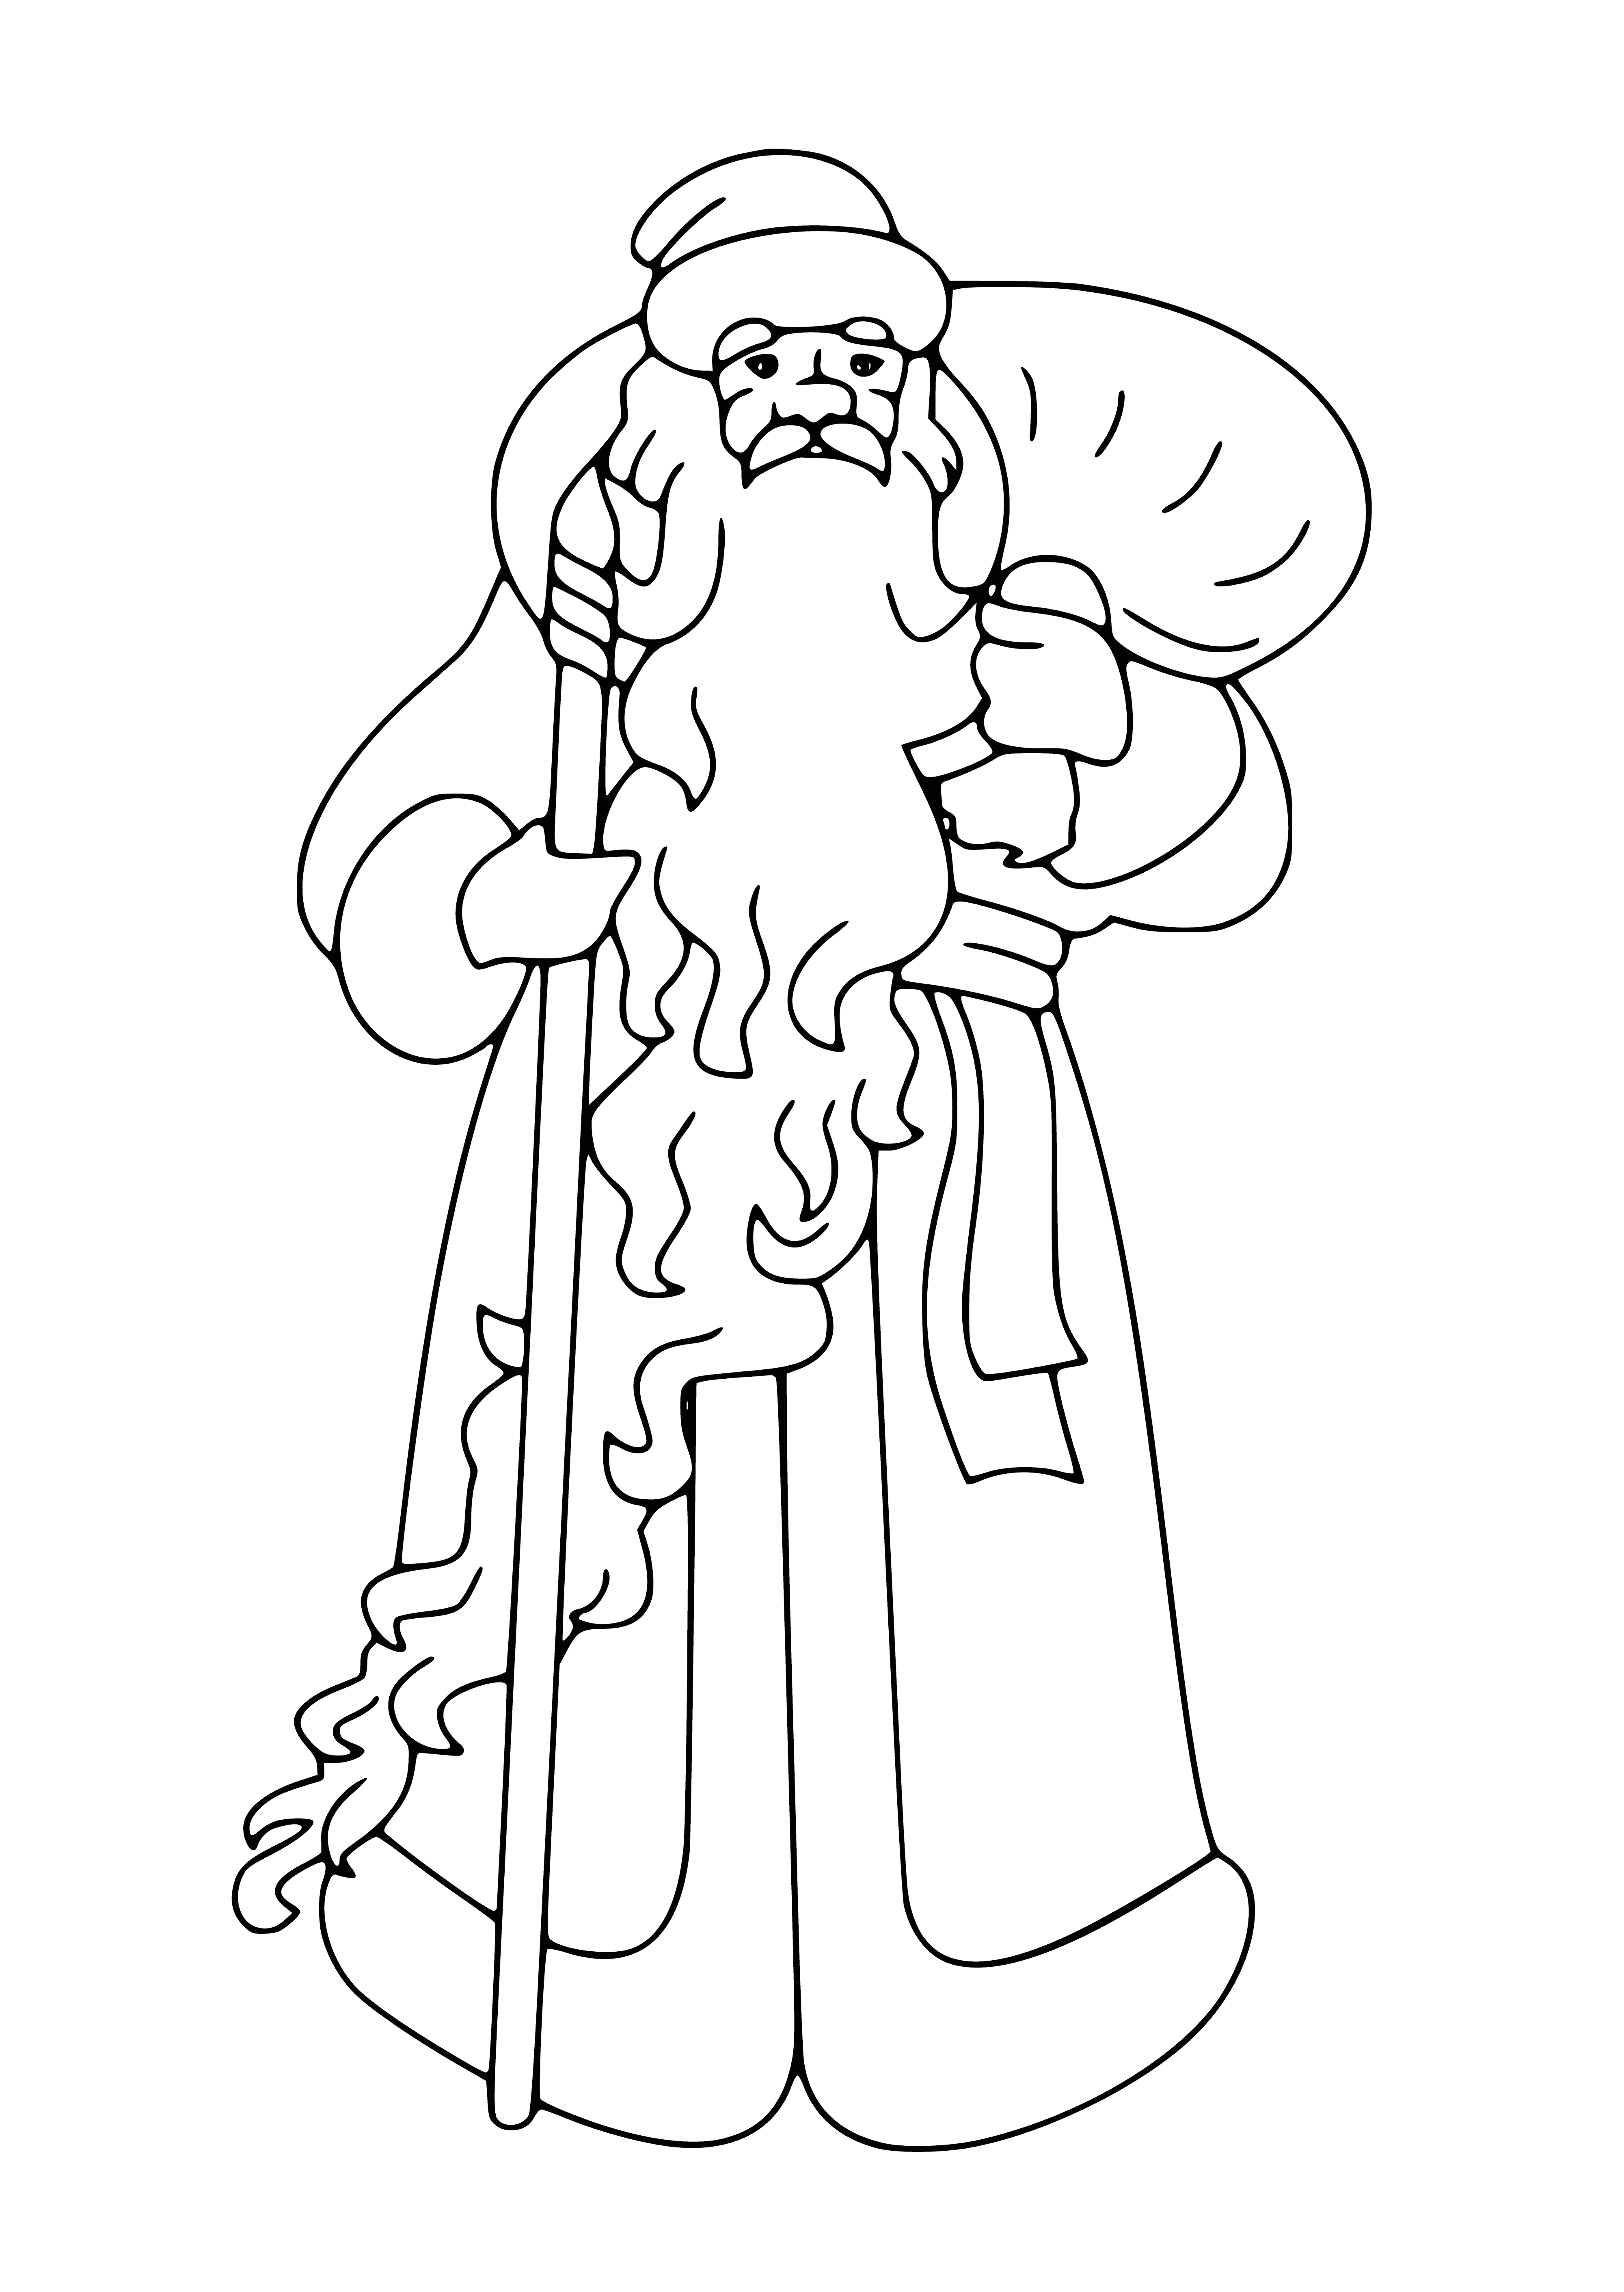 coloring page: Fat, jolly Santa sits with a little girl and holds presents, a sack filled with more gifts next to him.